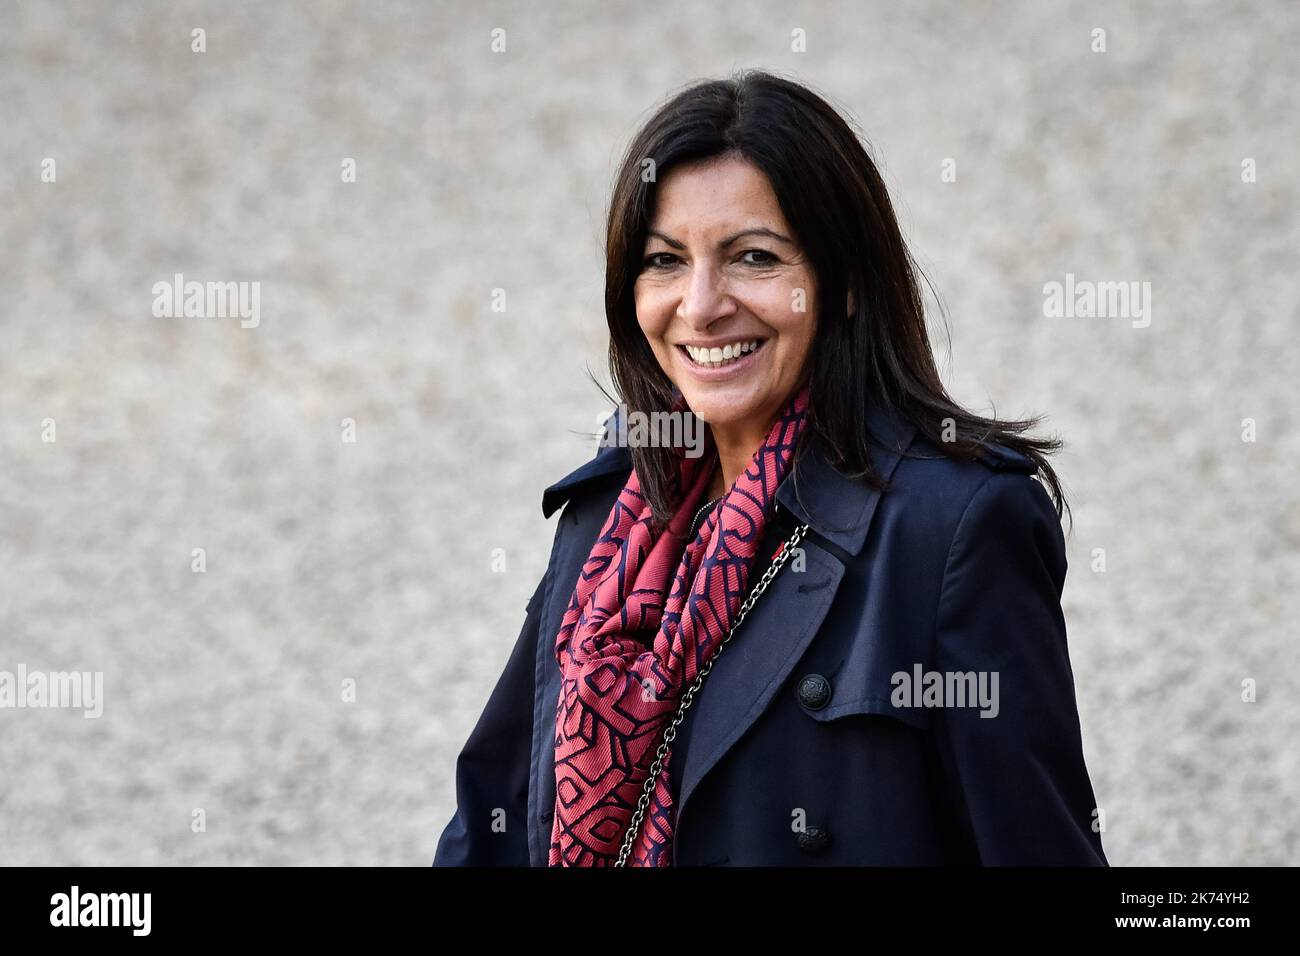 Anne Hidalgo (Paris city mayor), The French Olympic delegation back from Lima, is recieved by the french president Emmanuel Macron at the Elysee Palace. Stock Photo